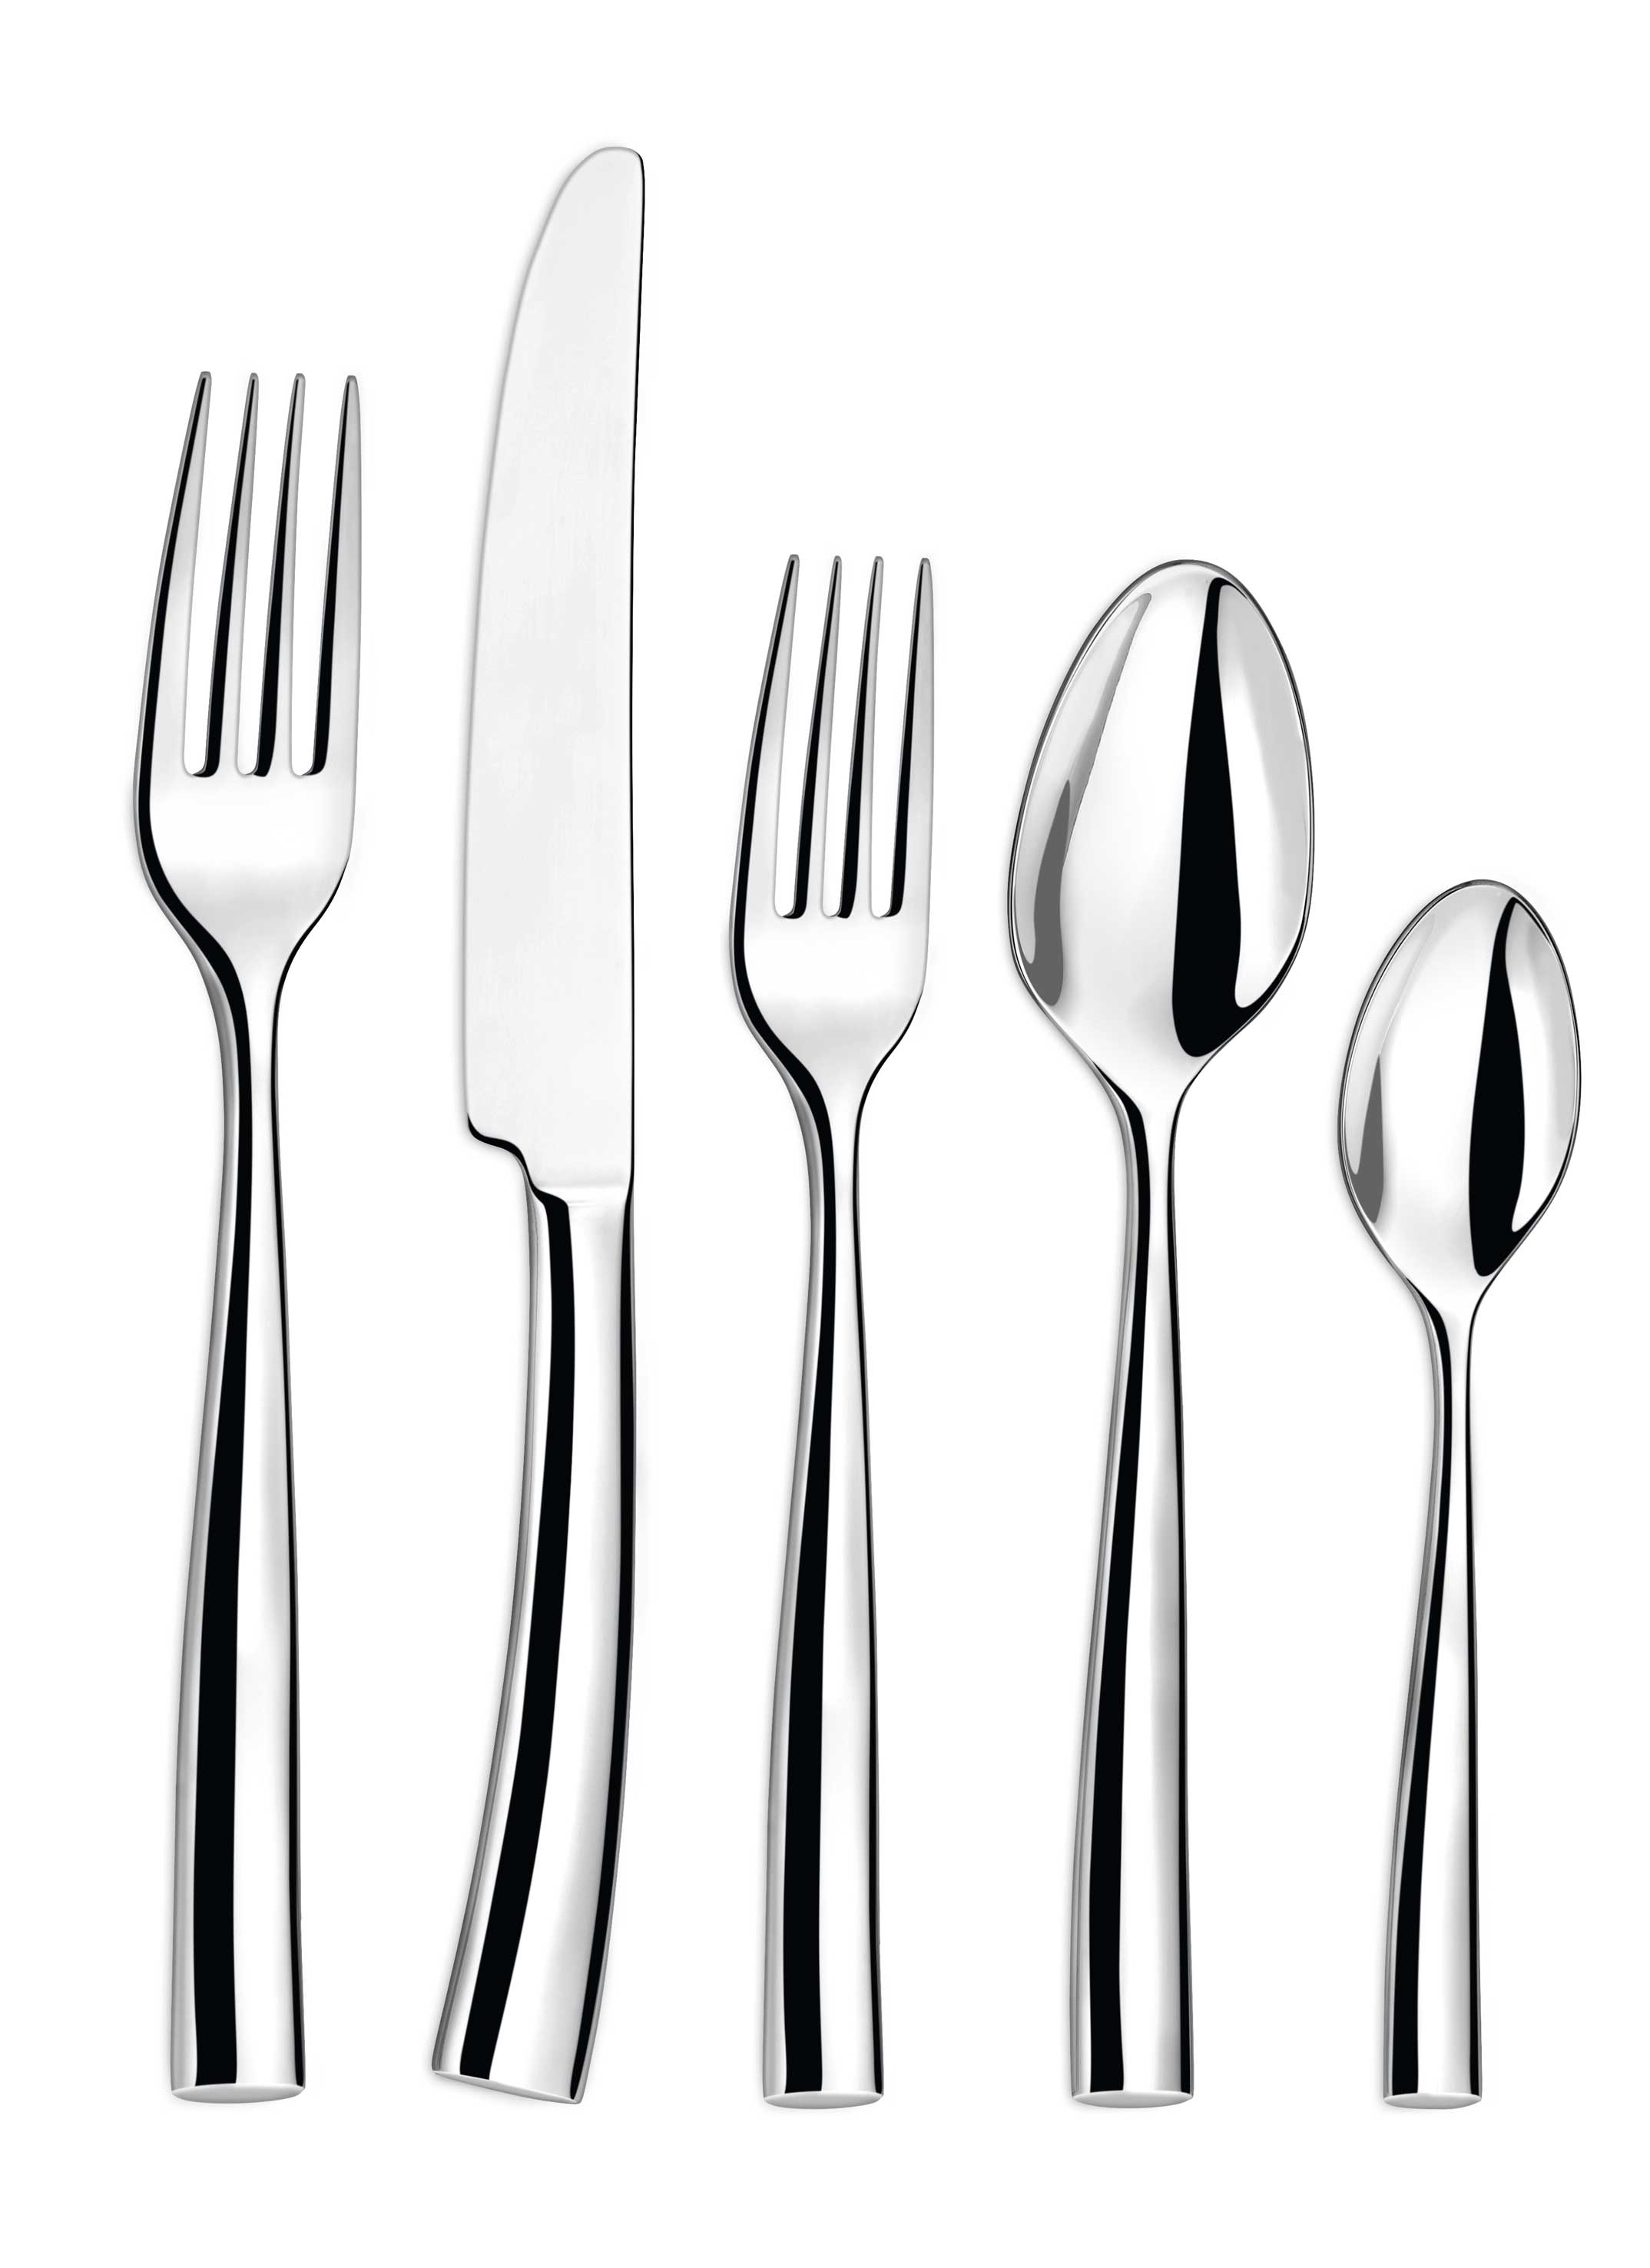 couzon-silhouette-5-piece-place-setting.jpg